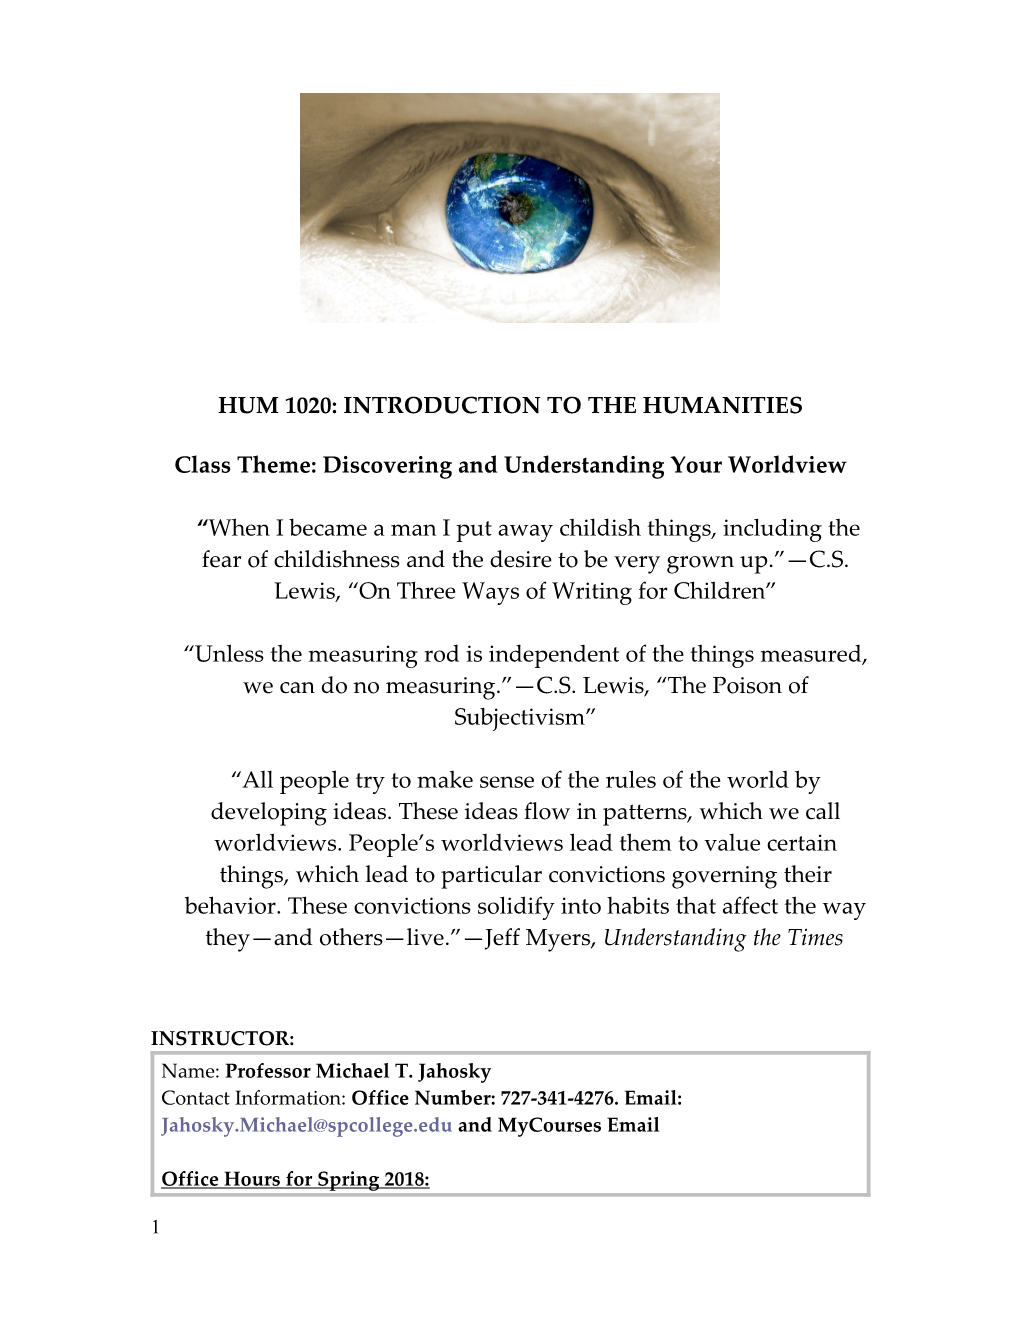 Class Theme: Discovering and Understanding Your Worldview